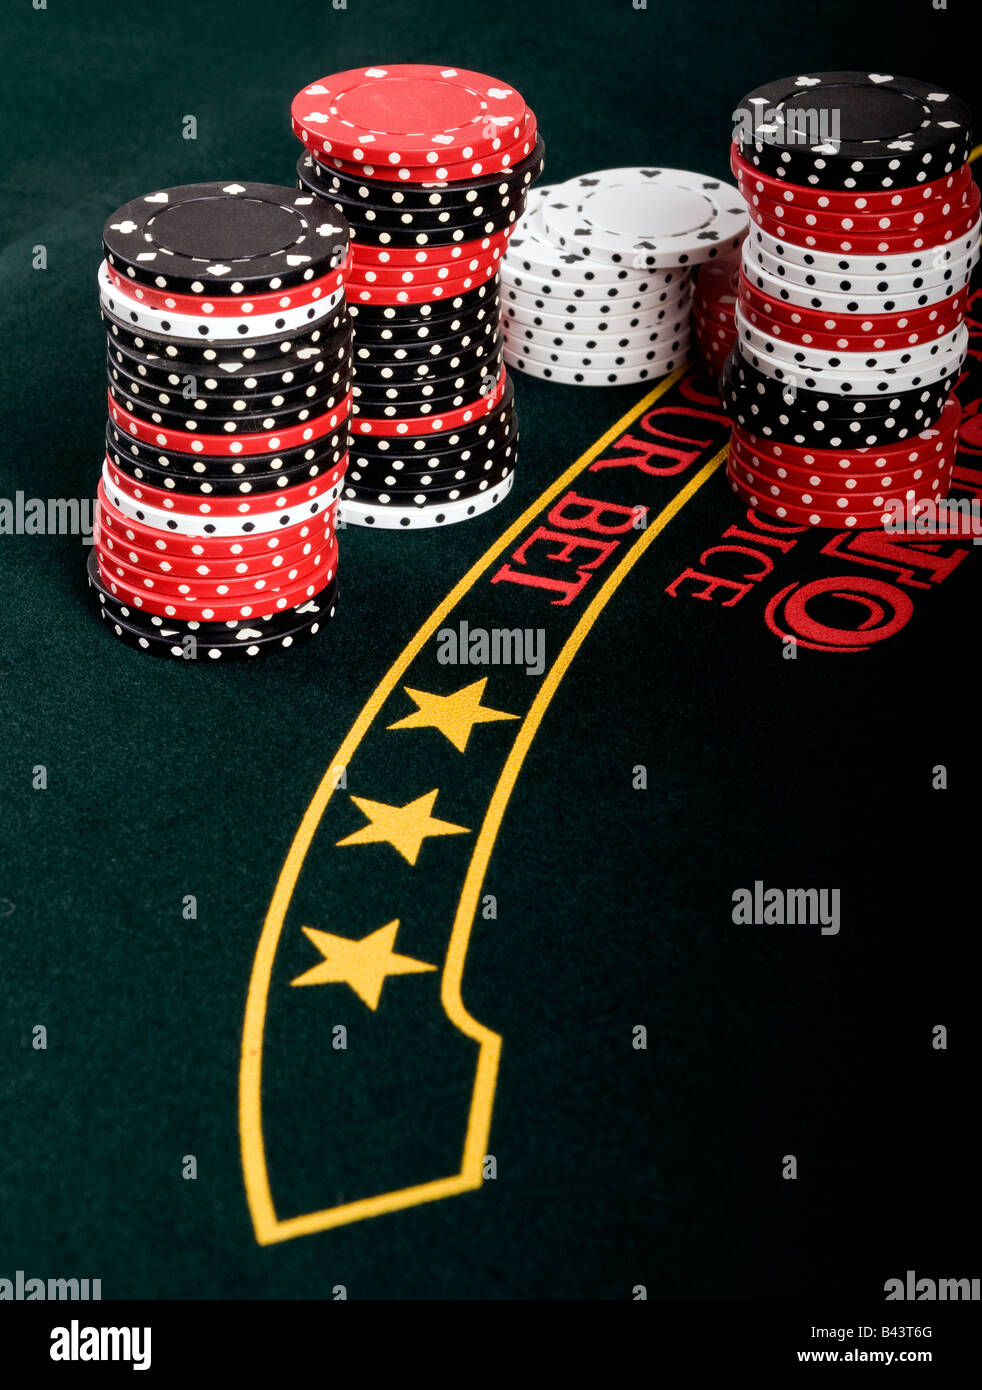 Poker chips on a Gaming Table Stock Photo